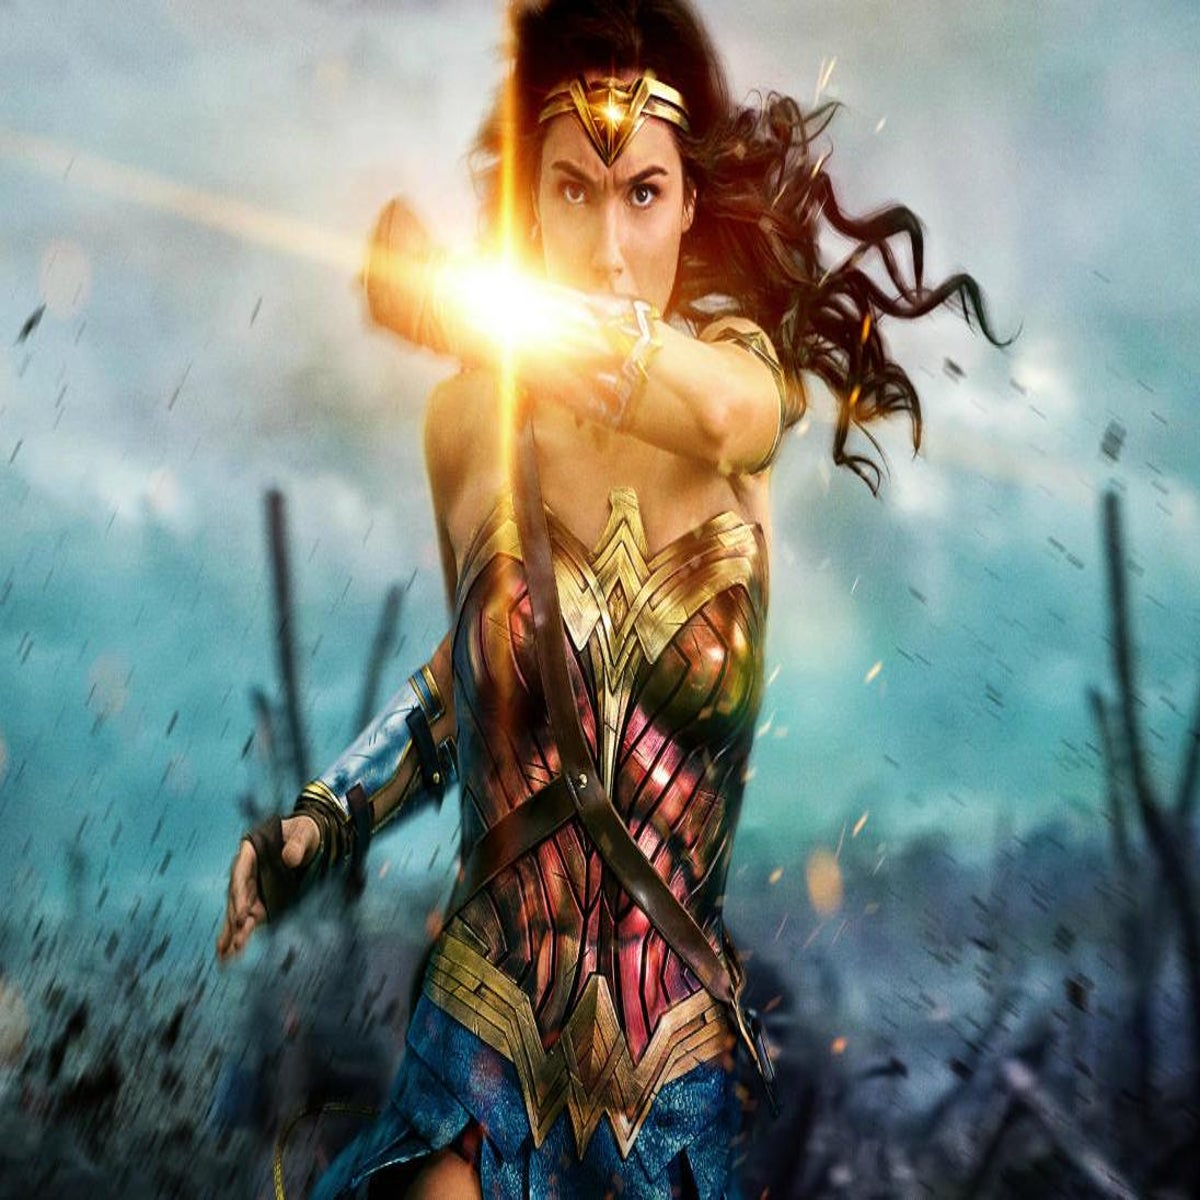 Chill out, bros: Women-only 'Wonder Woman' screening isn't a sexist attack  on men